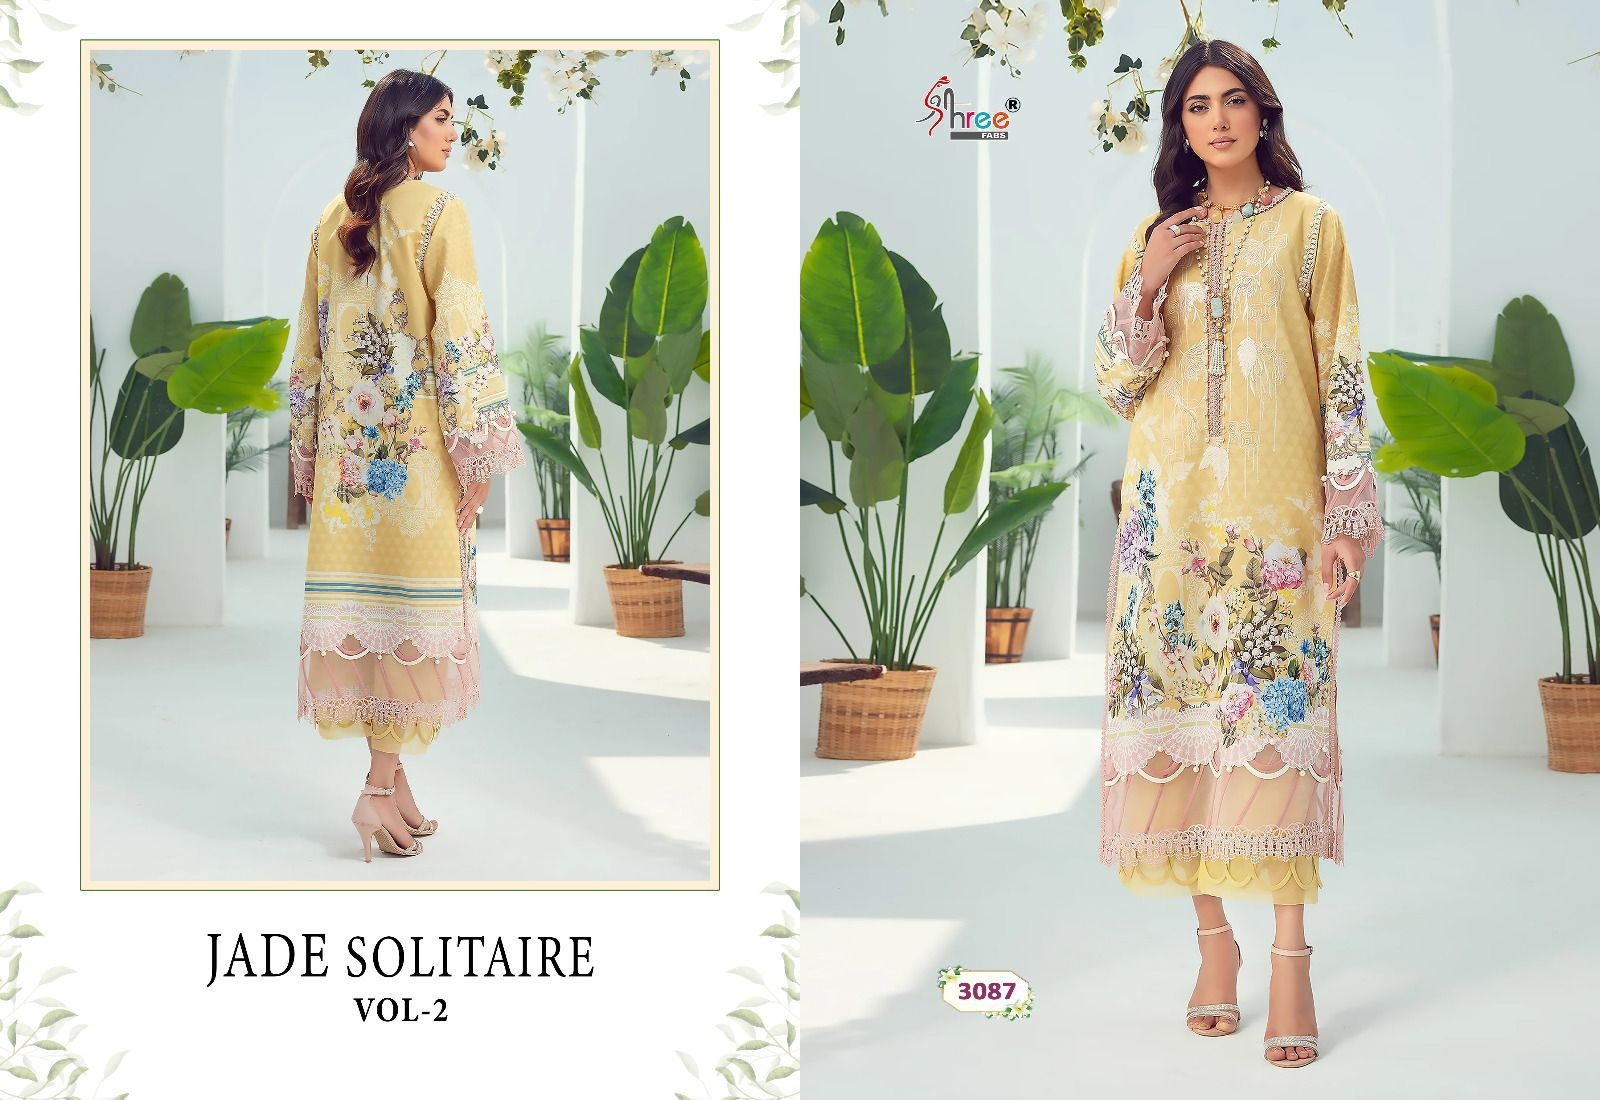 Shree Jade Solitaire Vol 2 collection 1